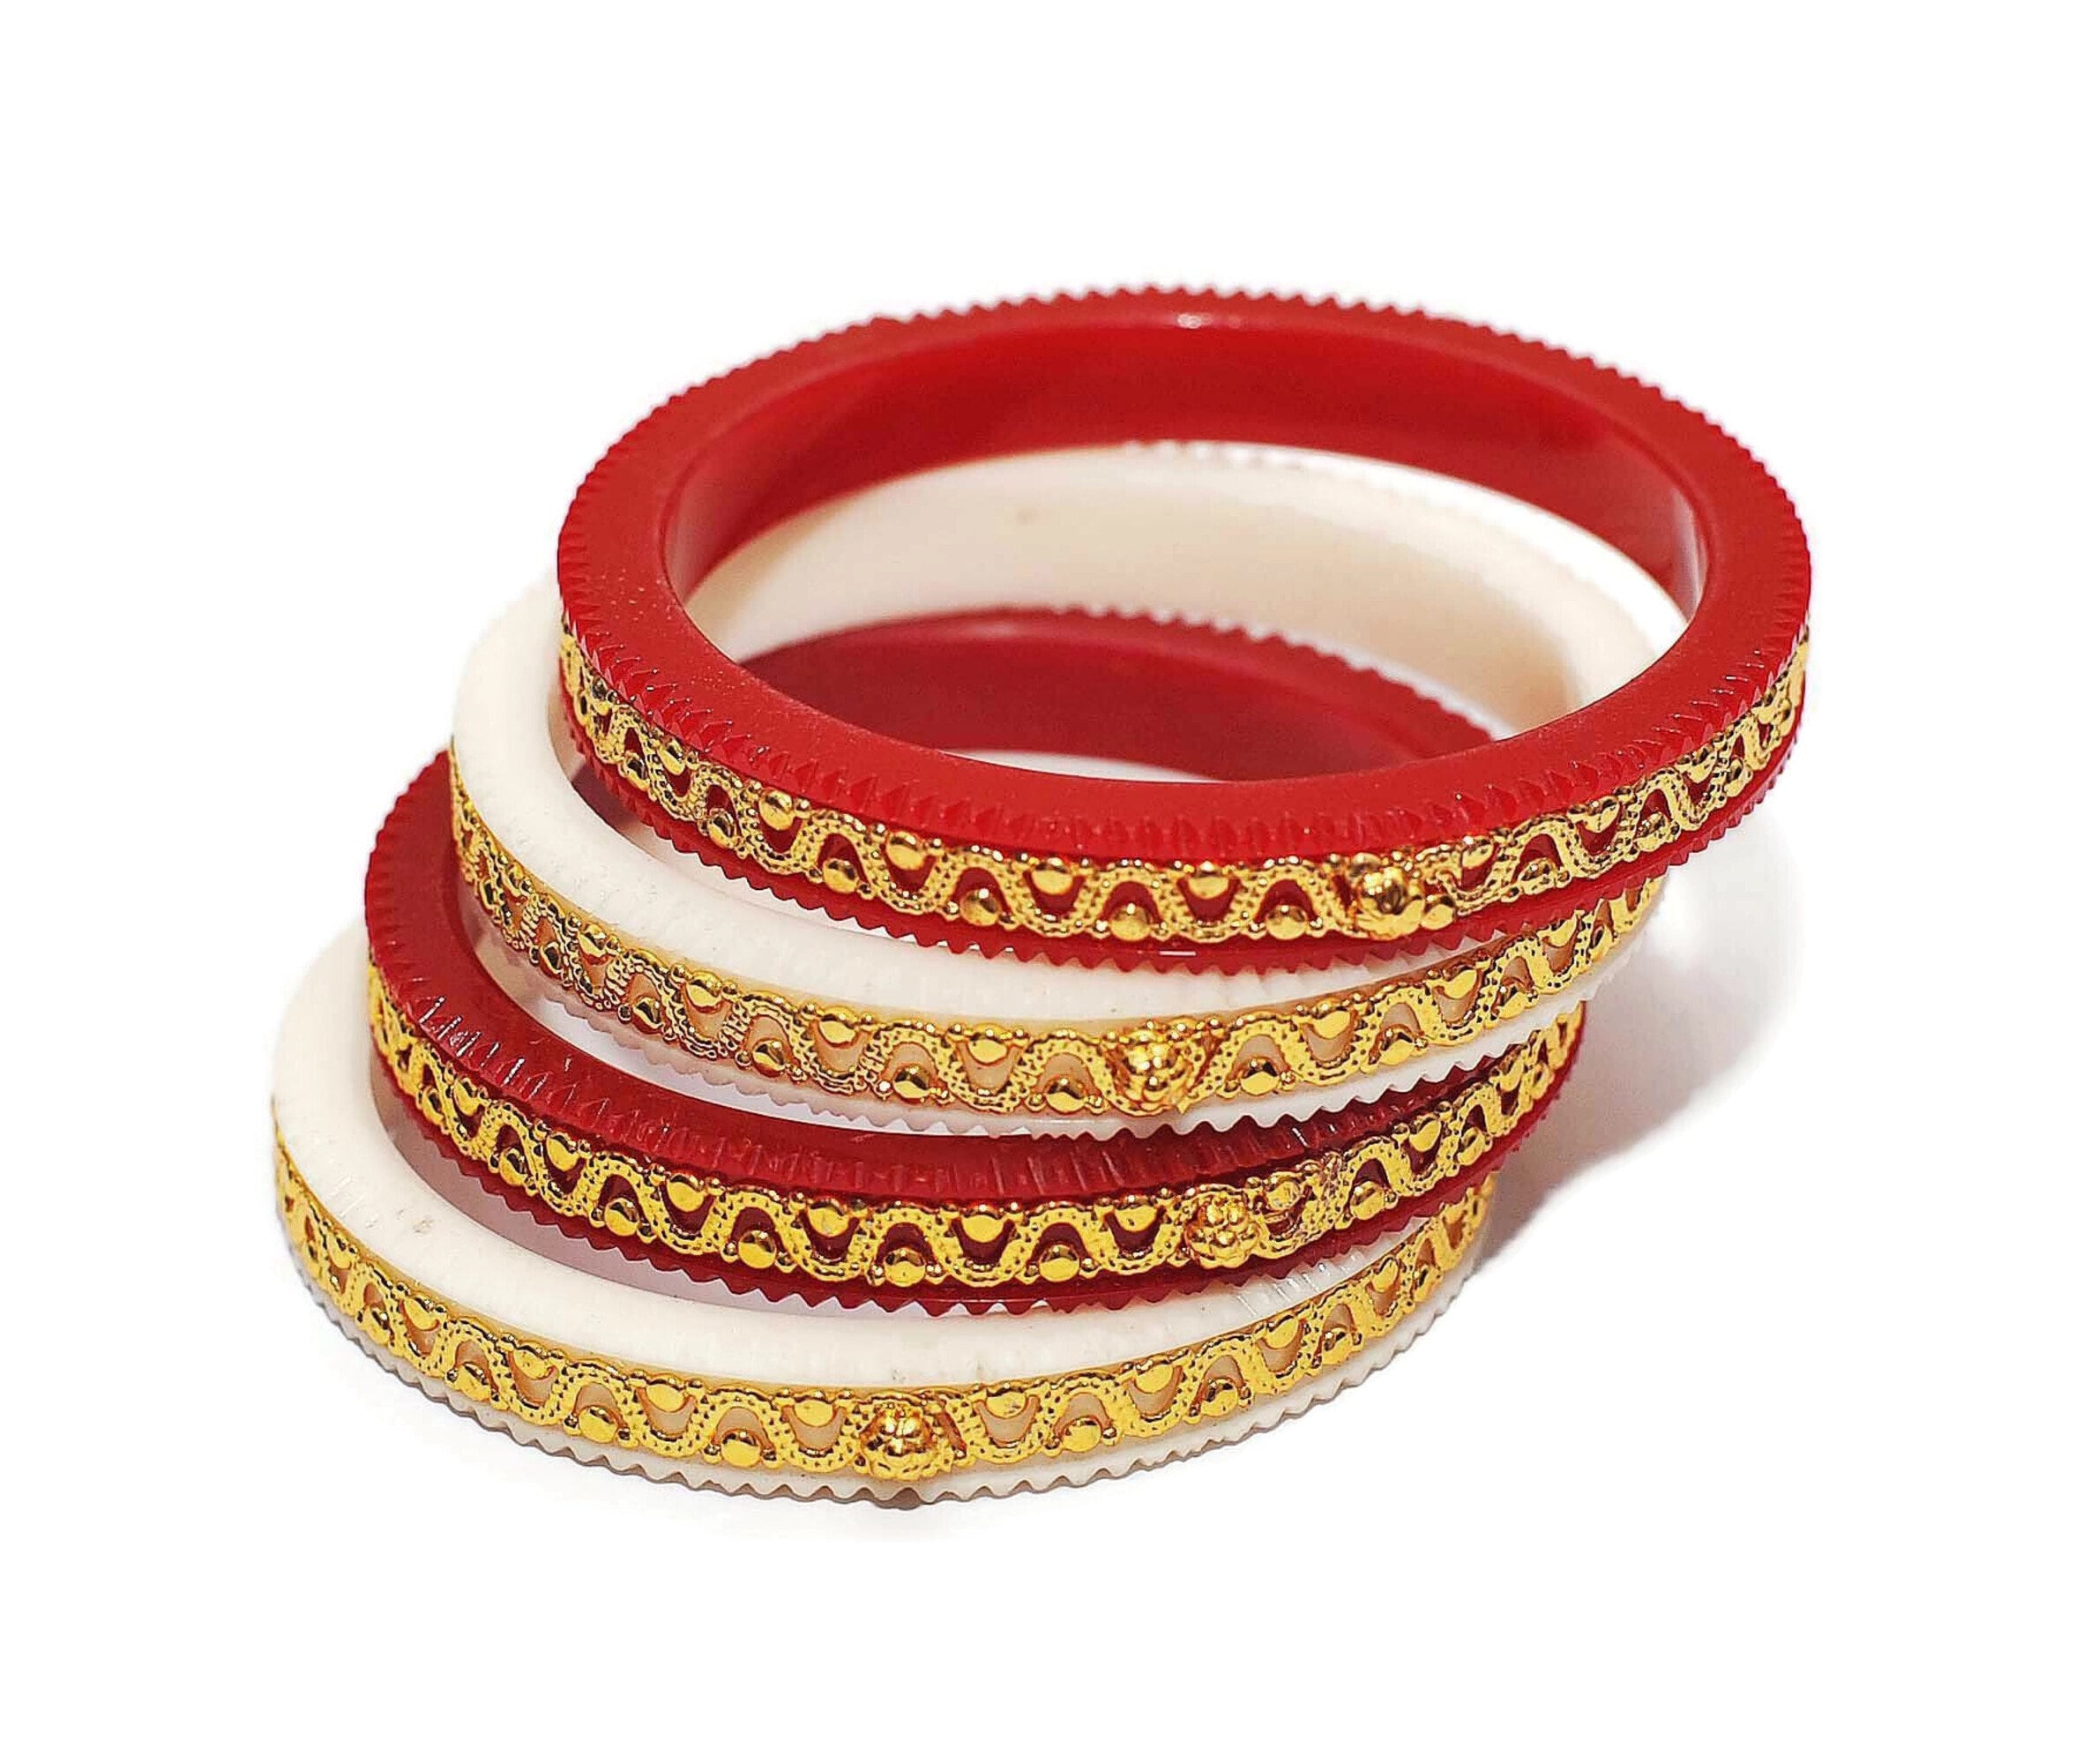 Indian Traditional Gold Plated Hathi Mukh Pola Bangles For Women 2.8 Inches  | eBay